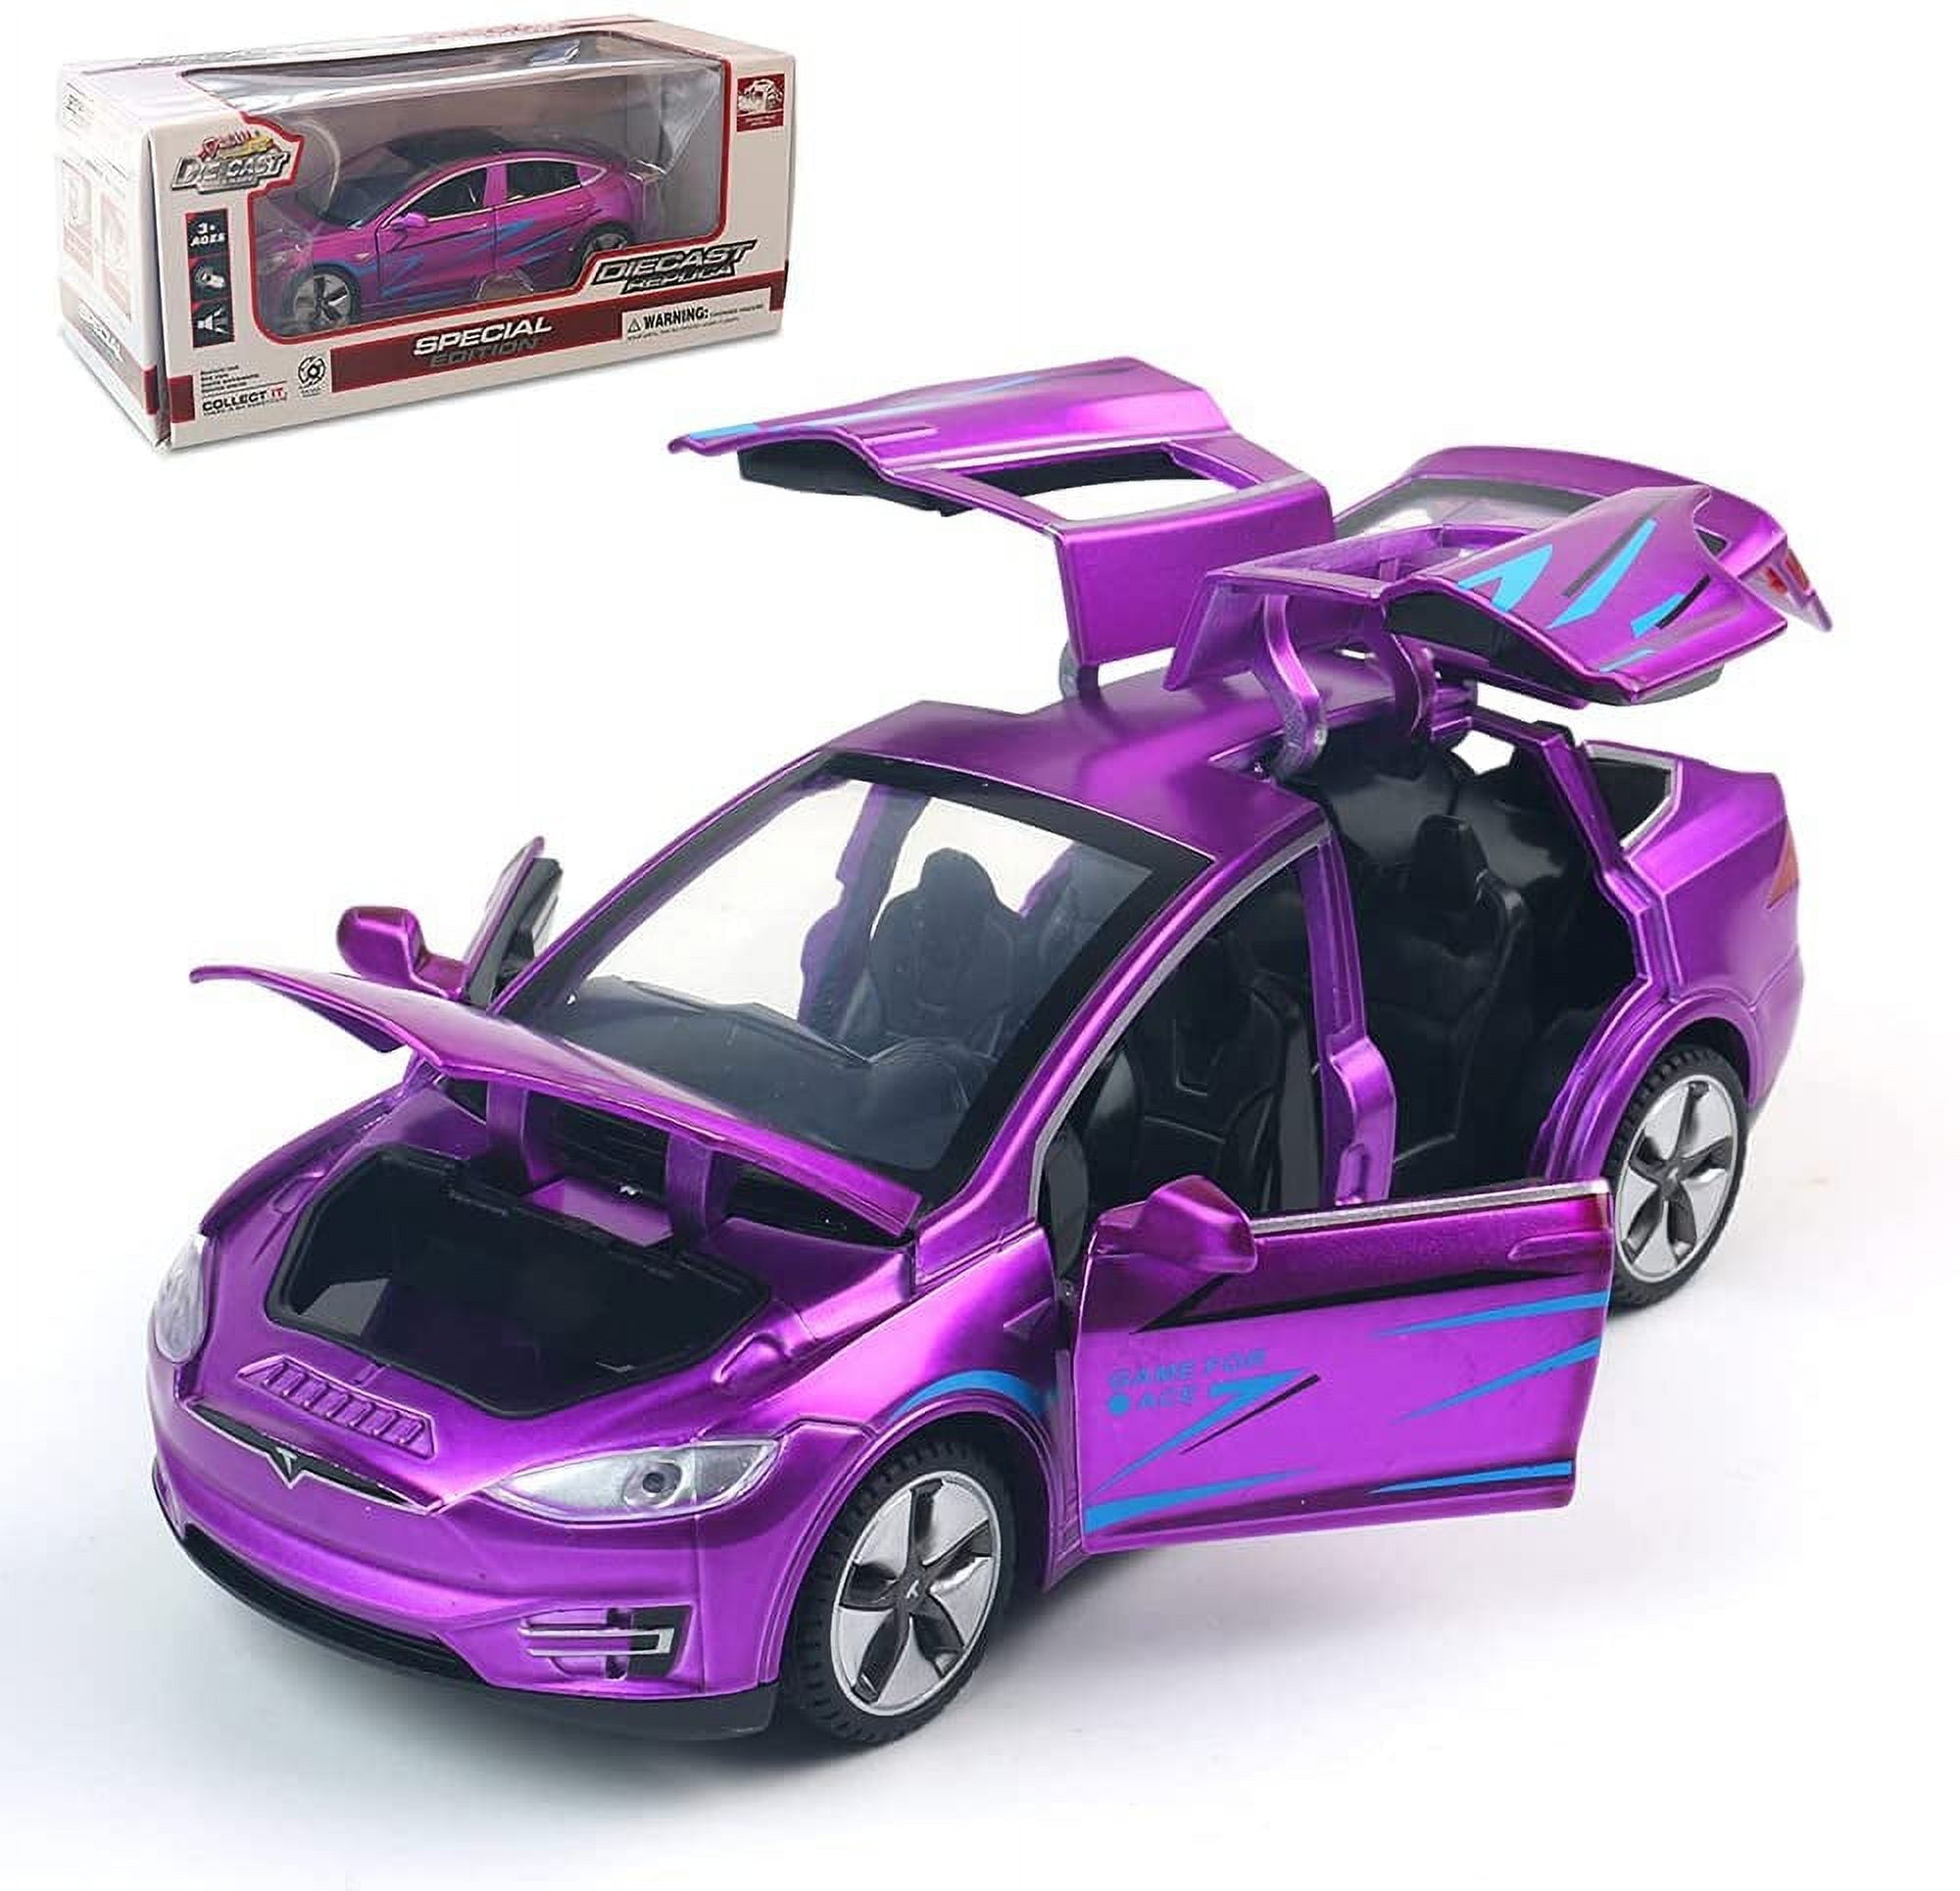 Toy Car 1:32 New POLO Plus Metal Alloy Diecast Car Model Miniature Model  With Sound Light Model Boys Gift Toys For Children's